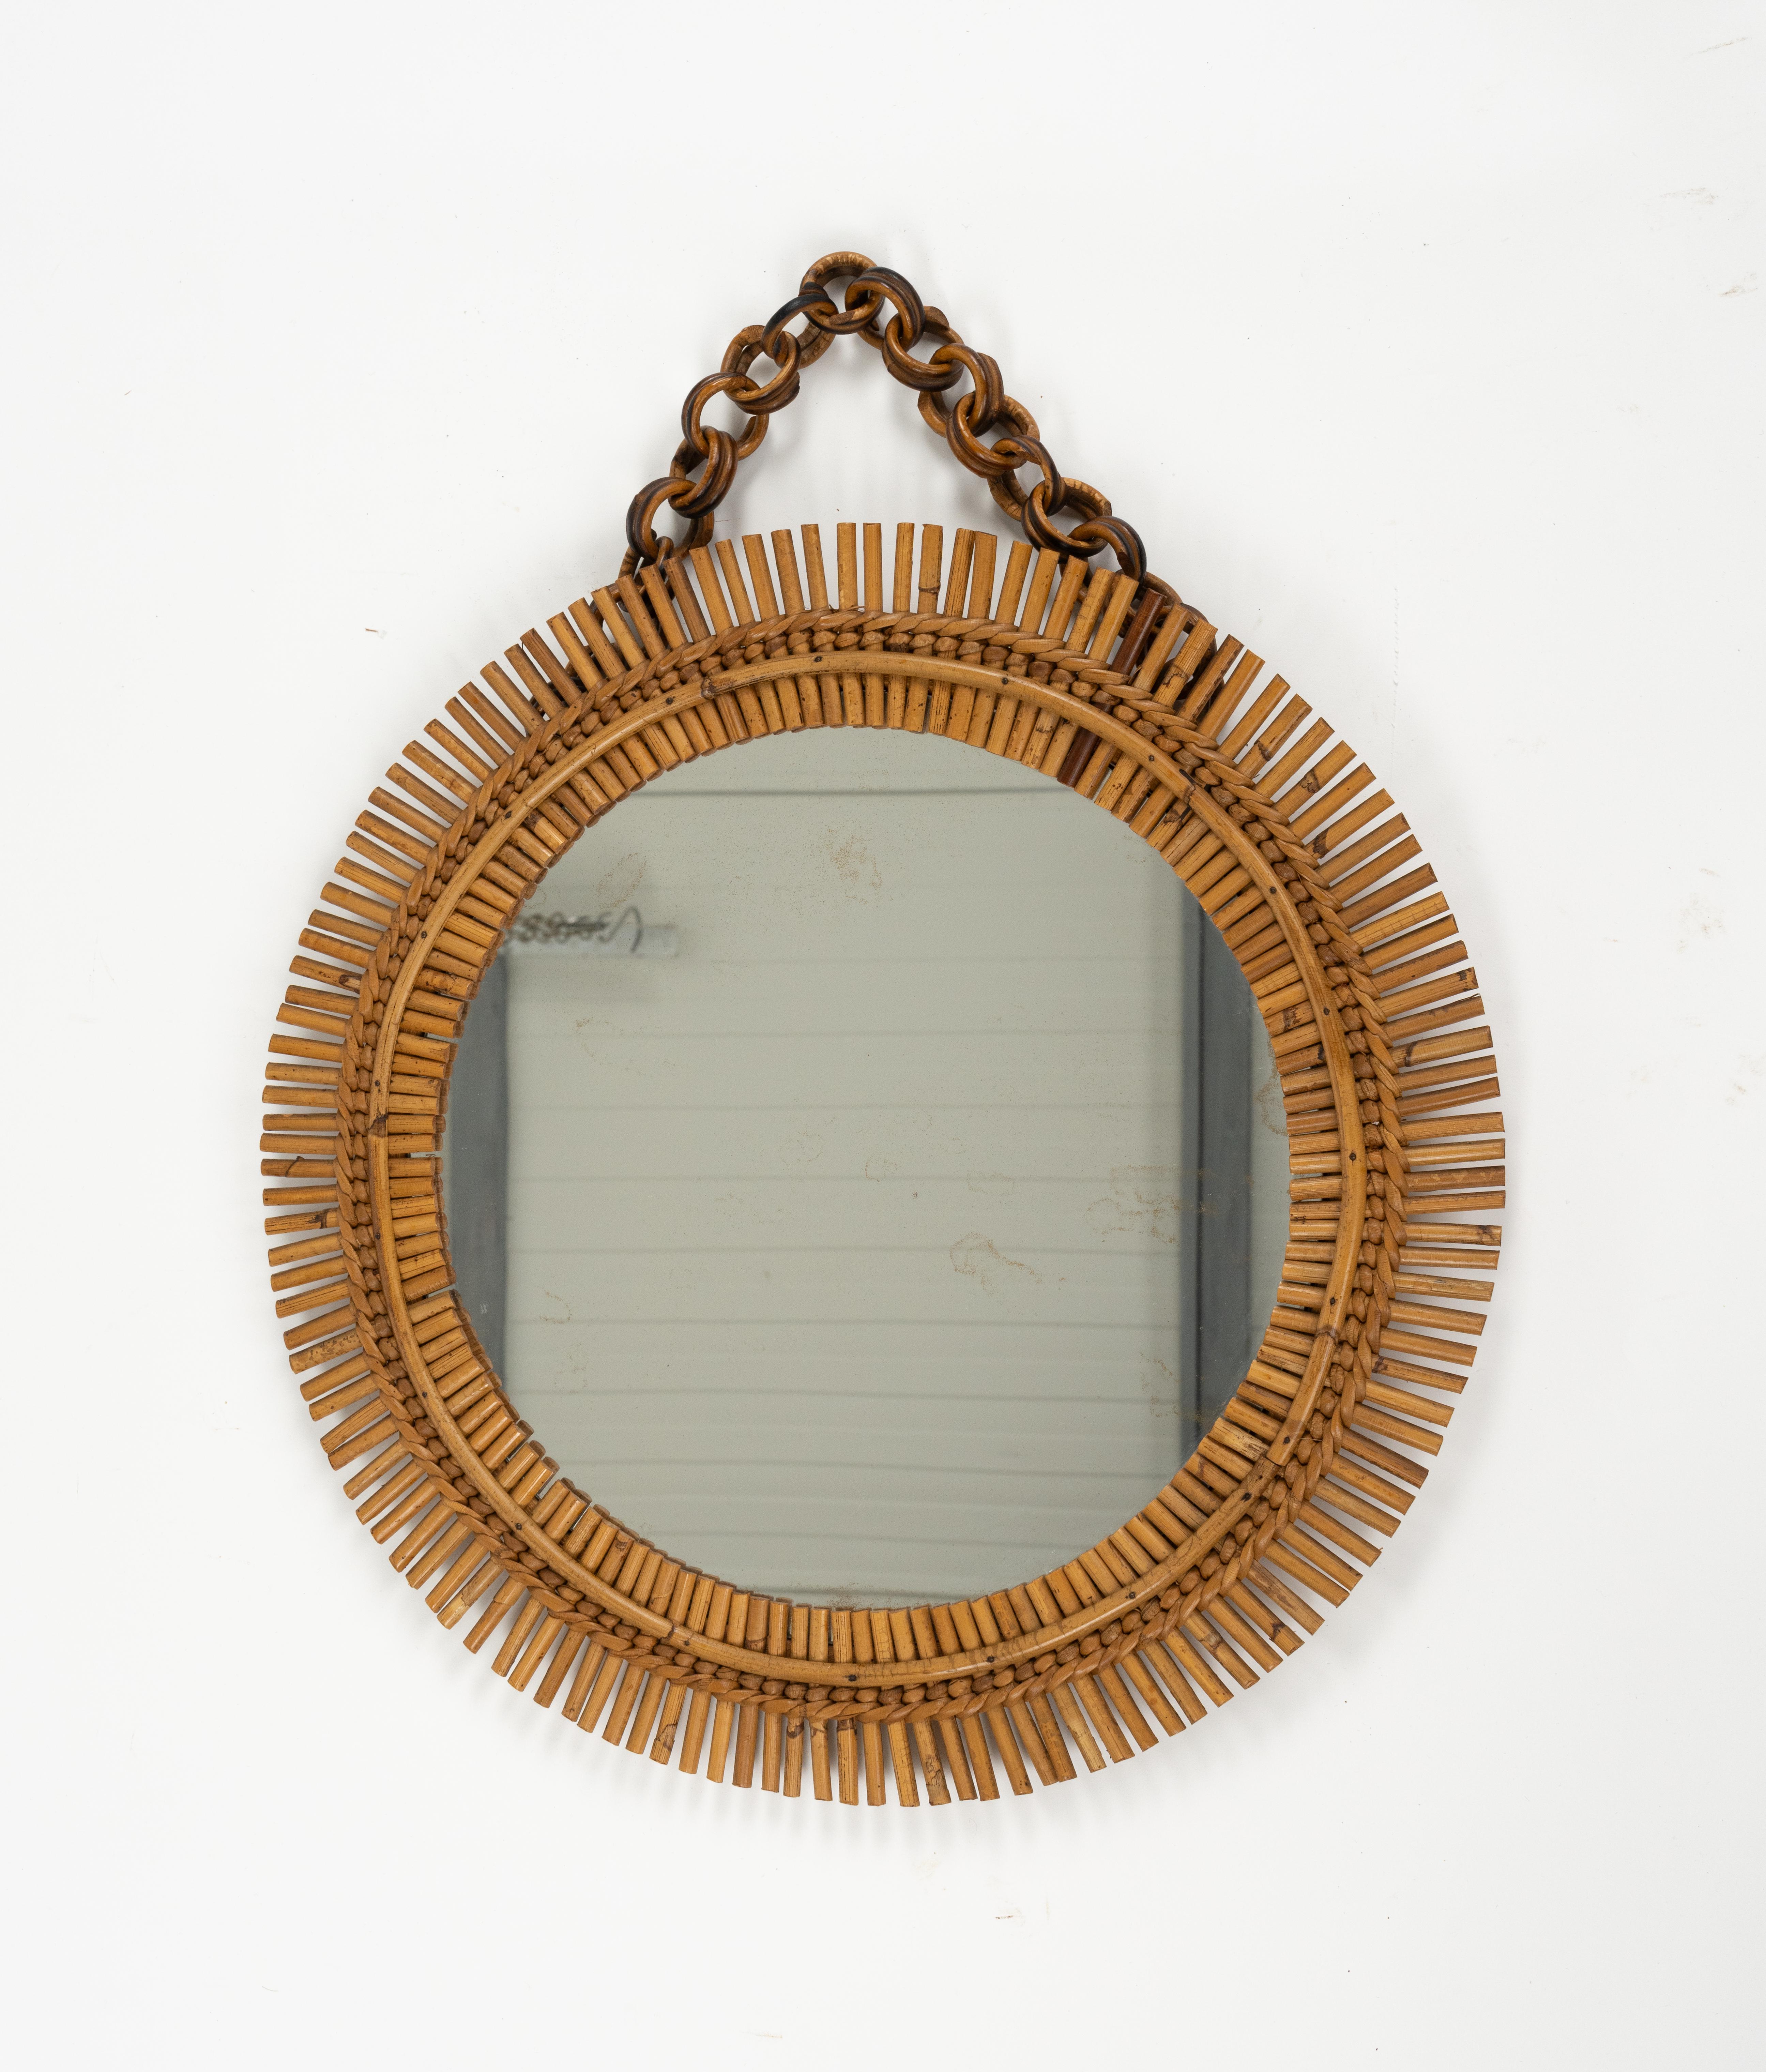 Midcentury Rattan and Bamboo Round Wall Mirror with Chain, Italy 1960s For Sale 2